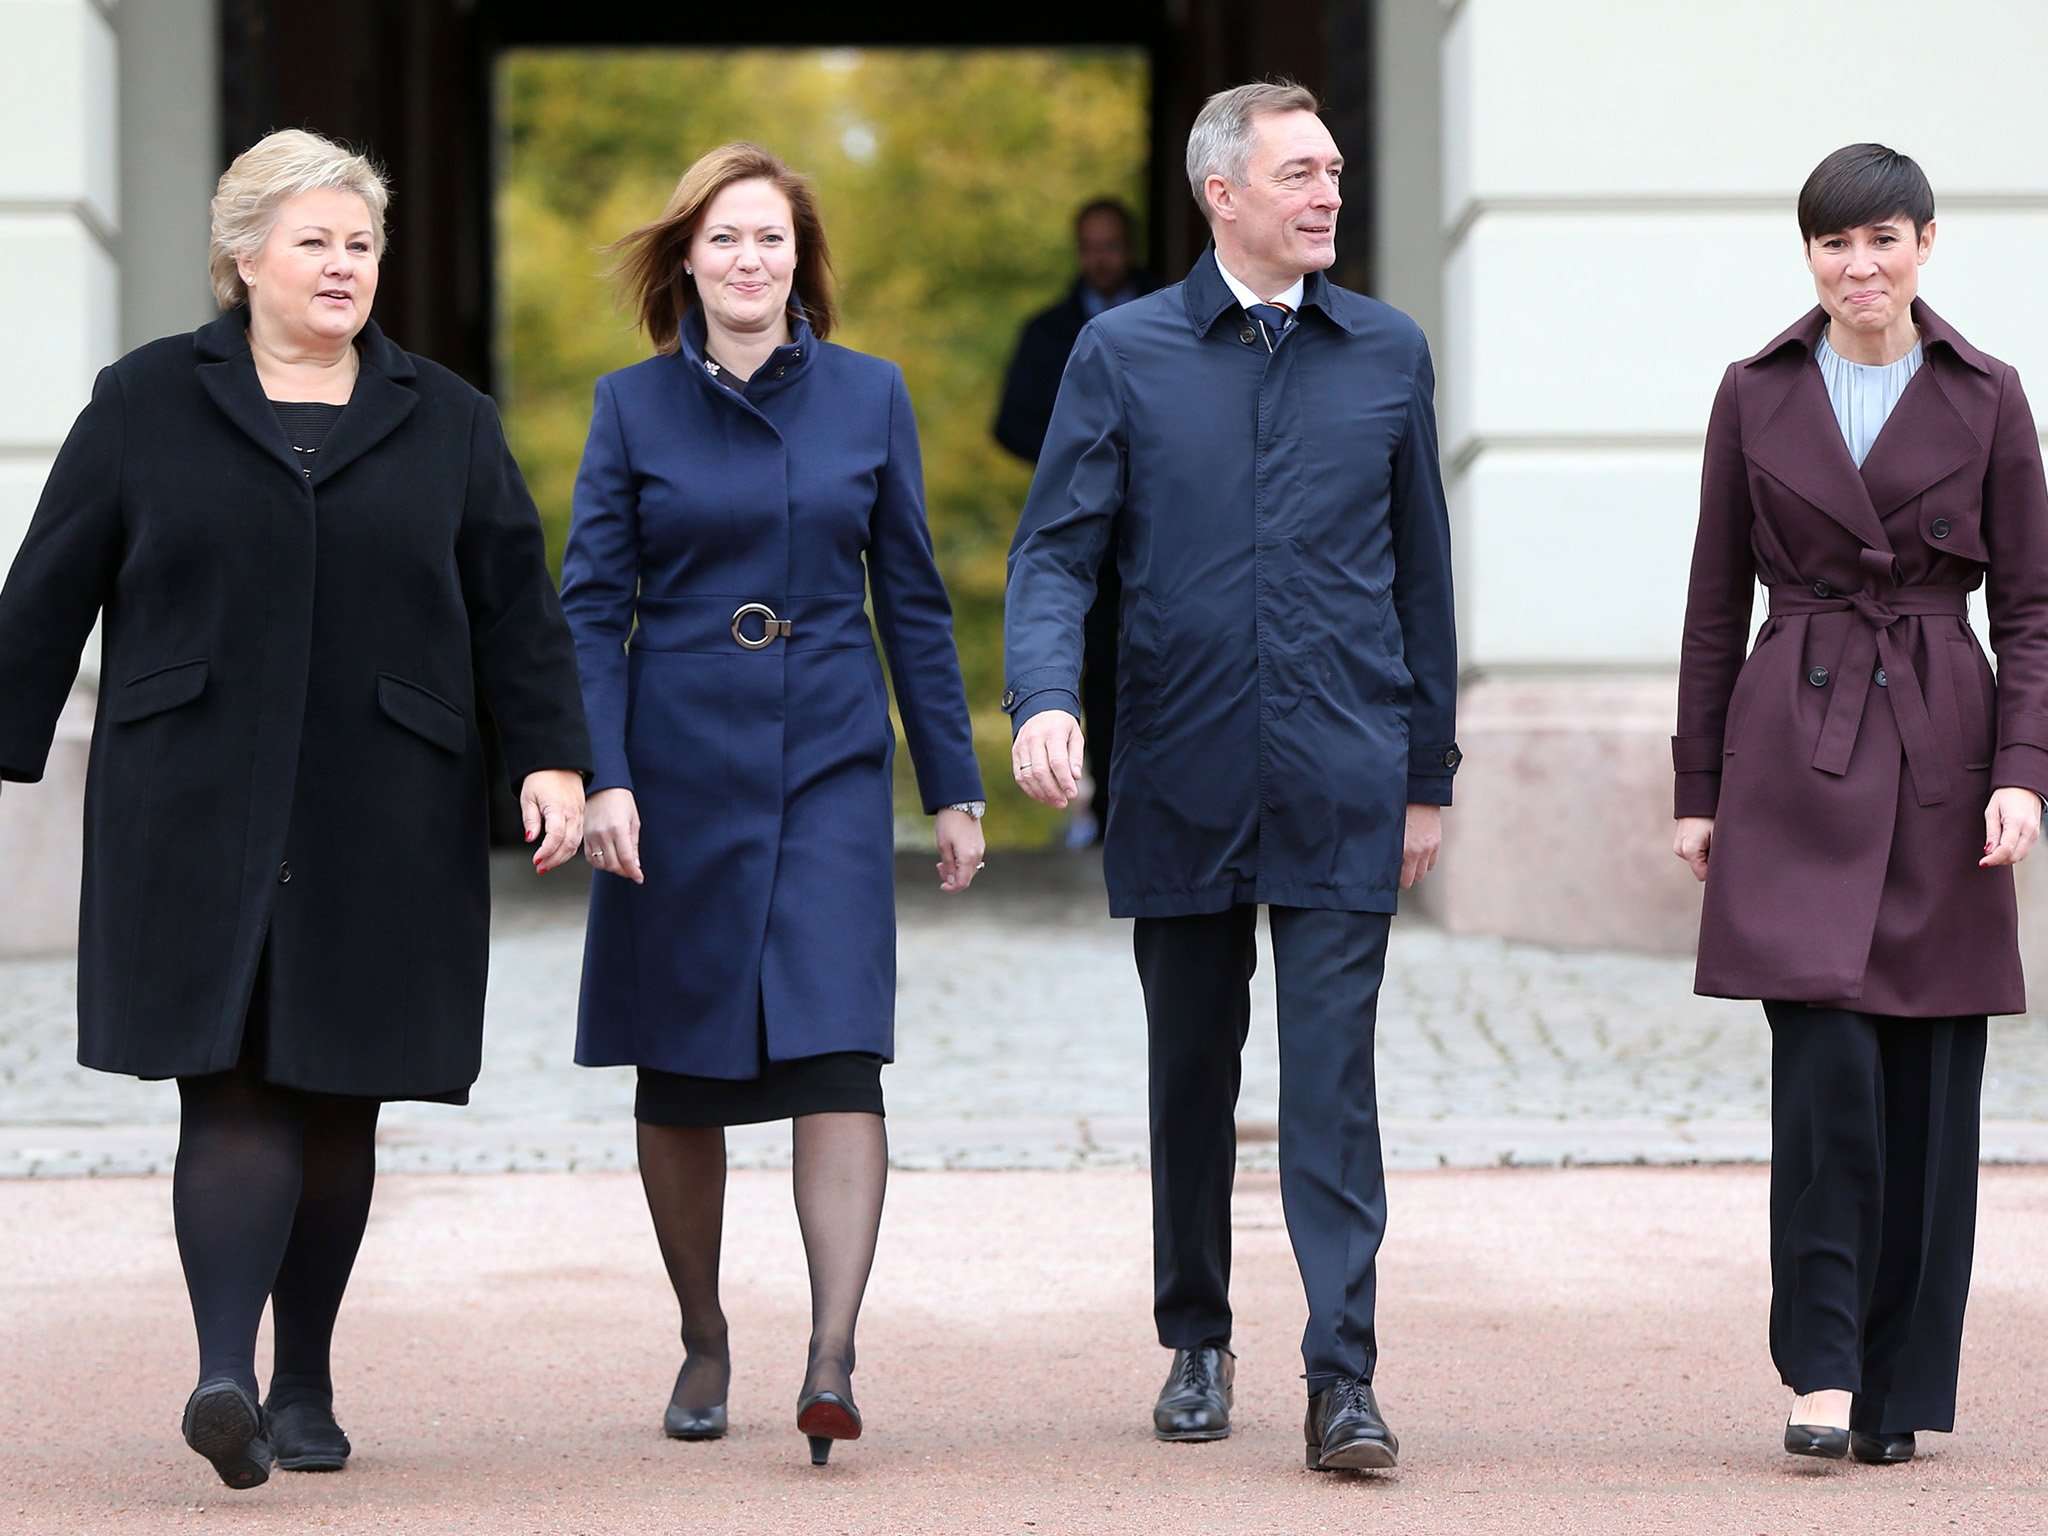 image for Women now occupy three most senior roles in Norway’s government